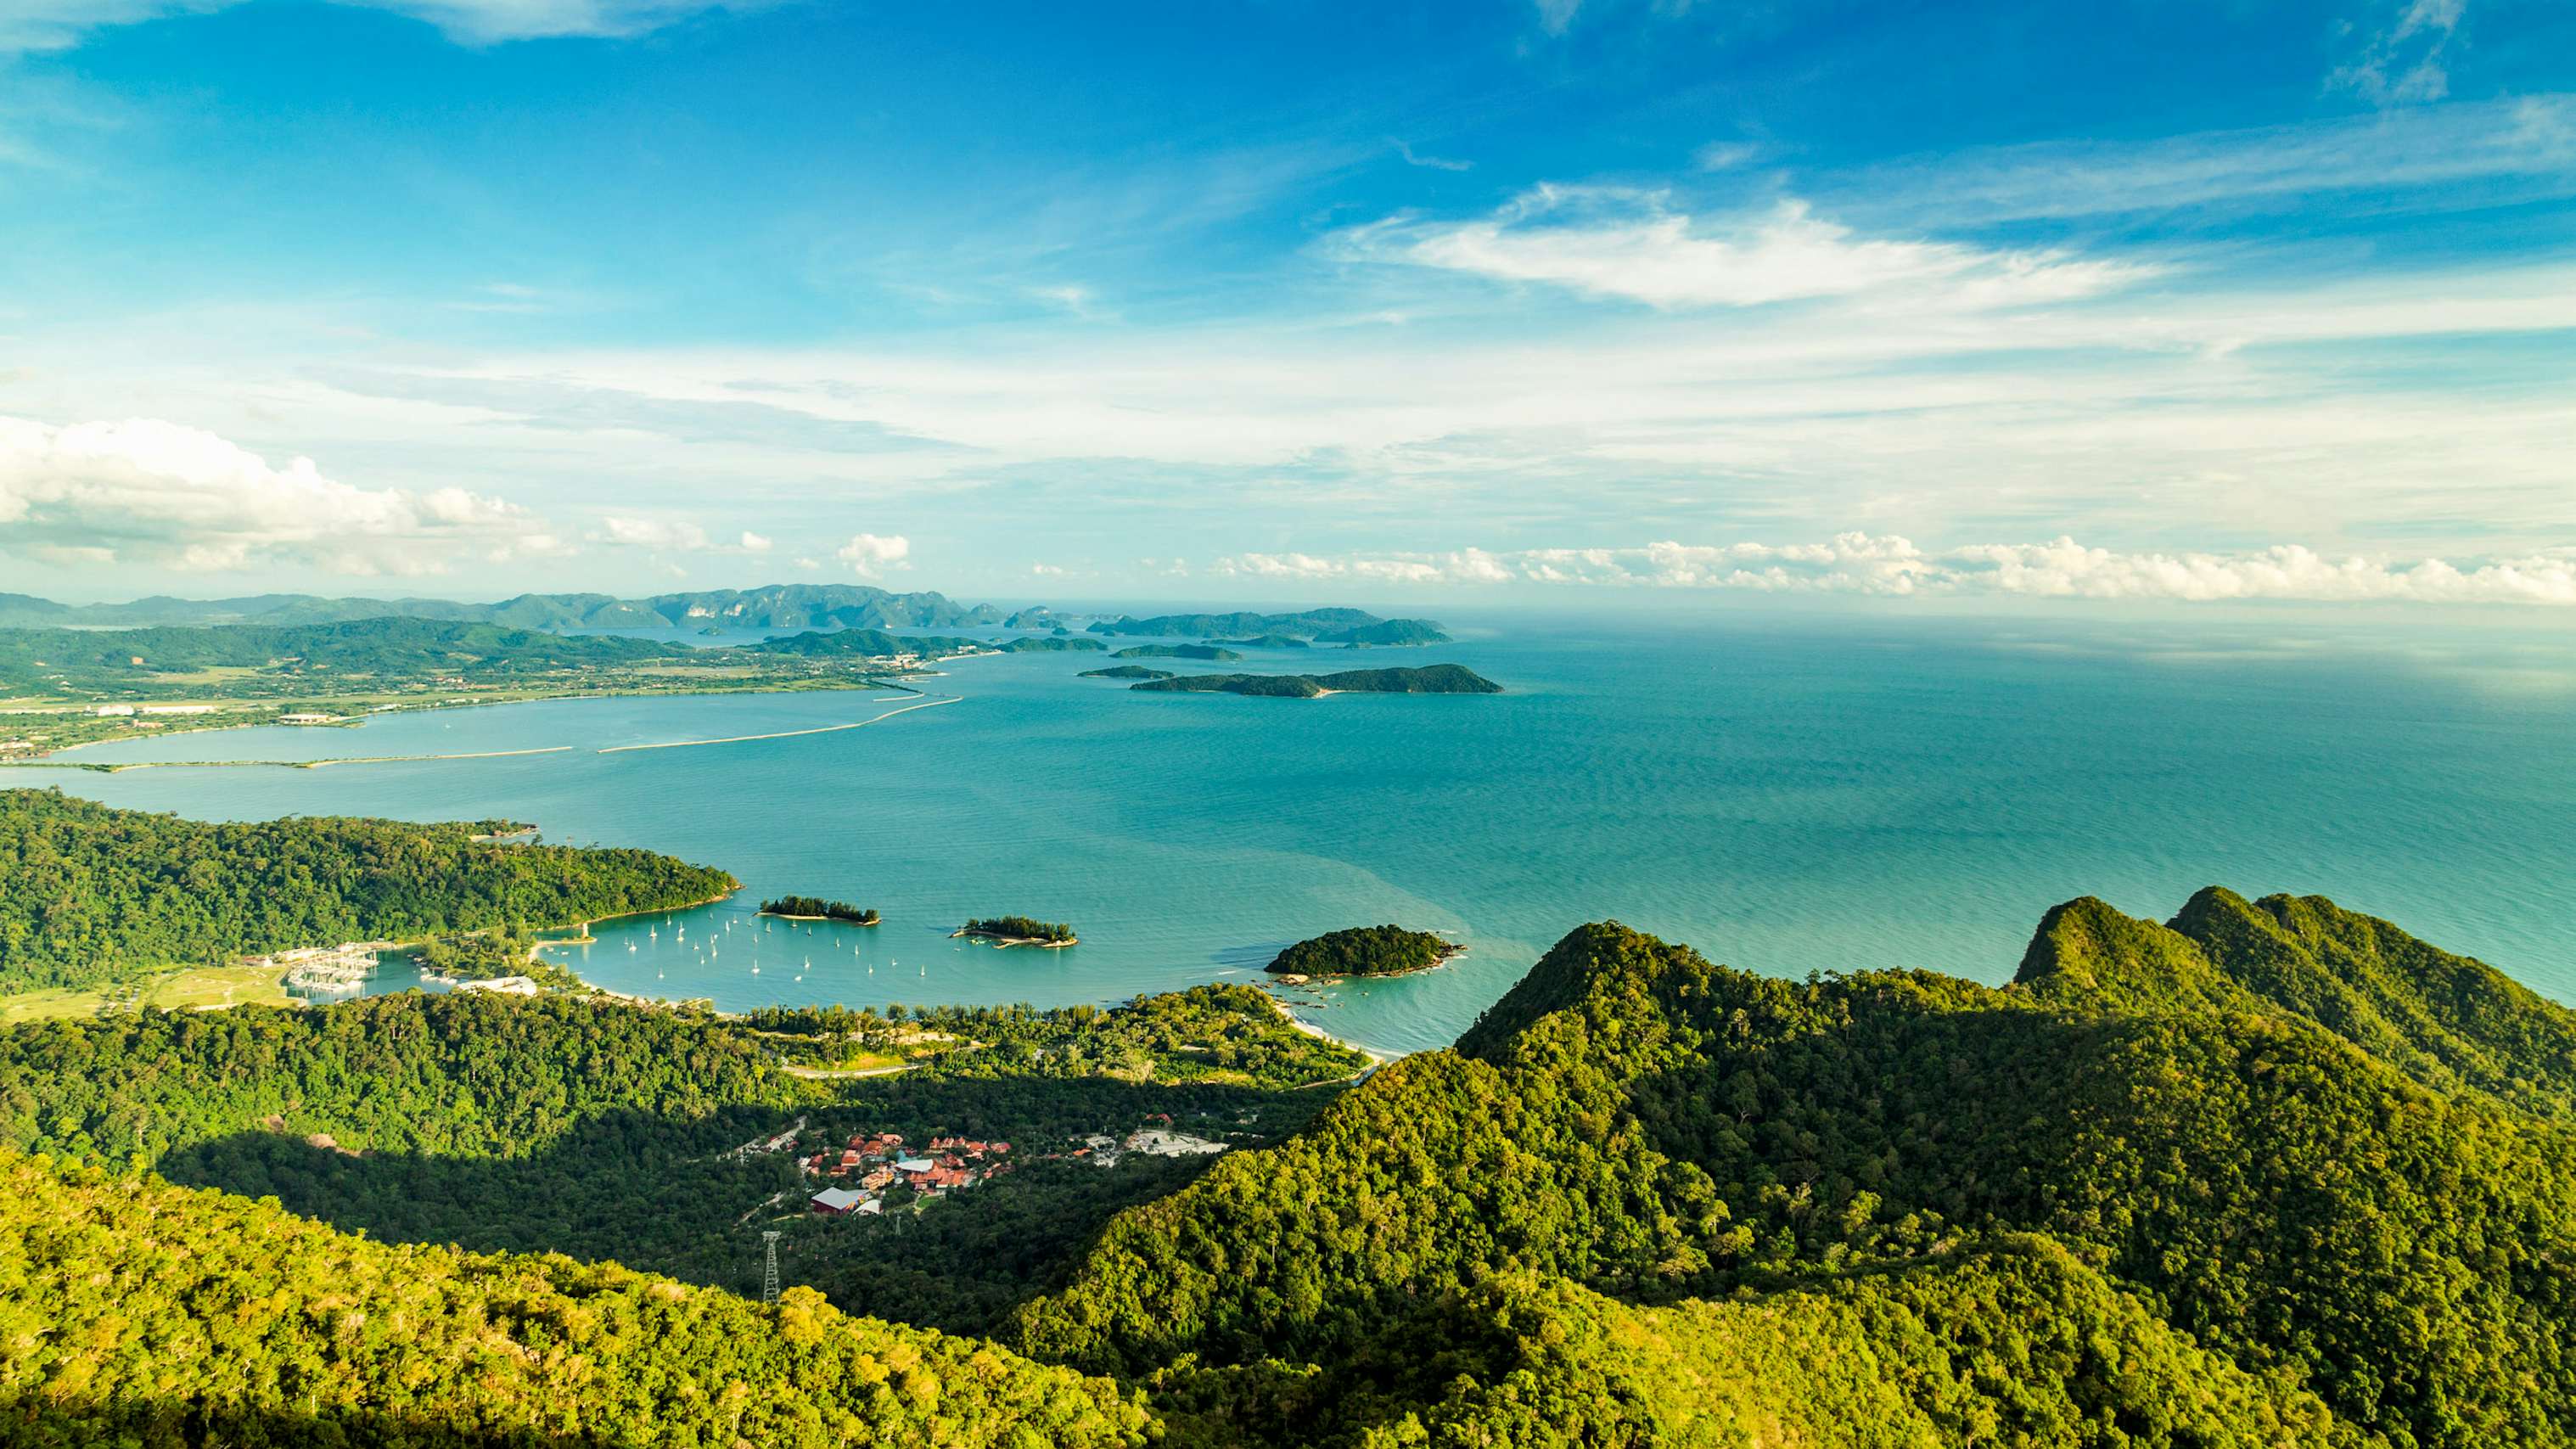 Malaysia Yacht Charter - Langkawi Yacht Charter View of tropical island Langkawi in Malaysia, covered with tropical forests. Aerial view on the bay, marina and archipelago of smaller islands in Andaman sea